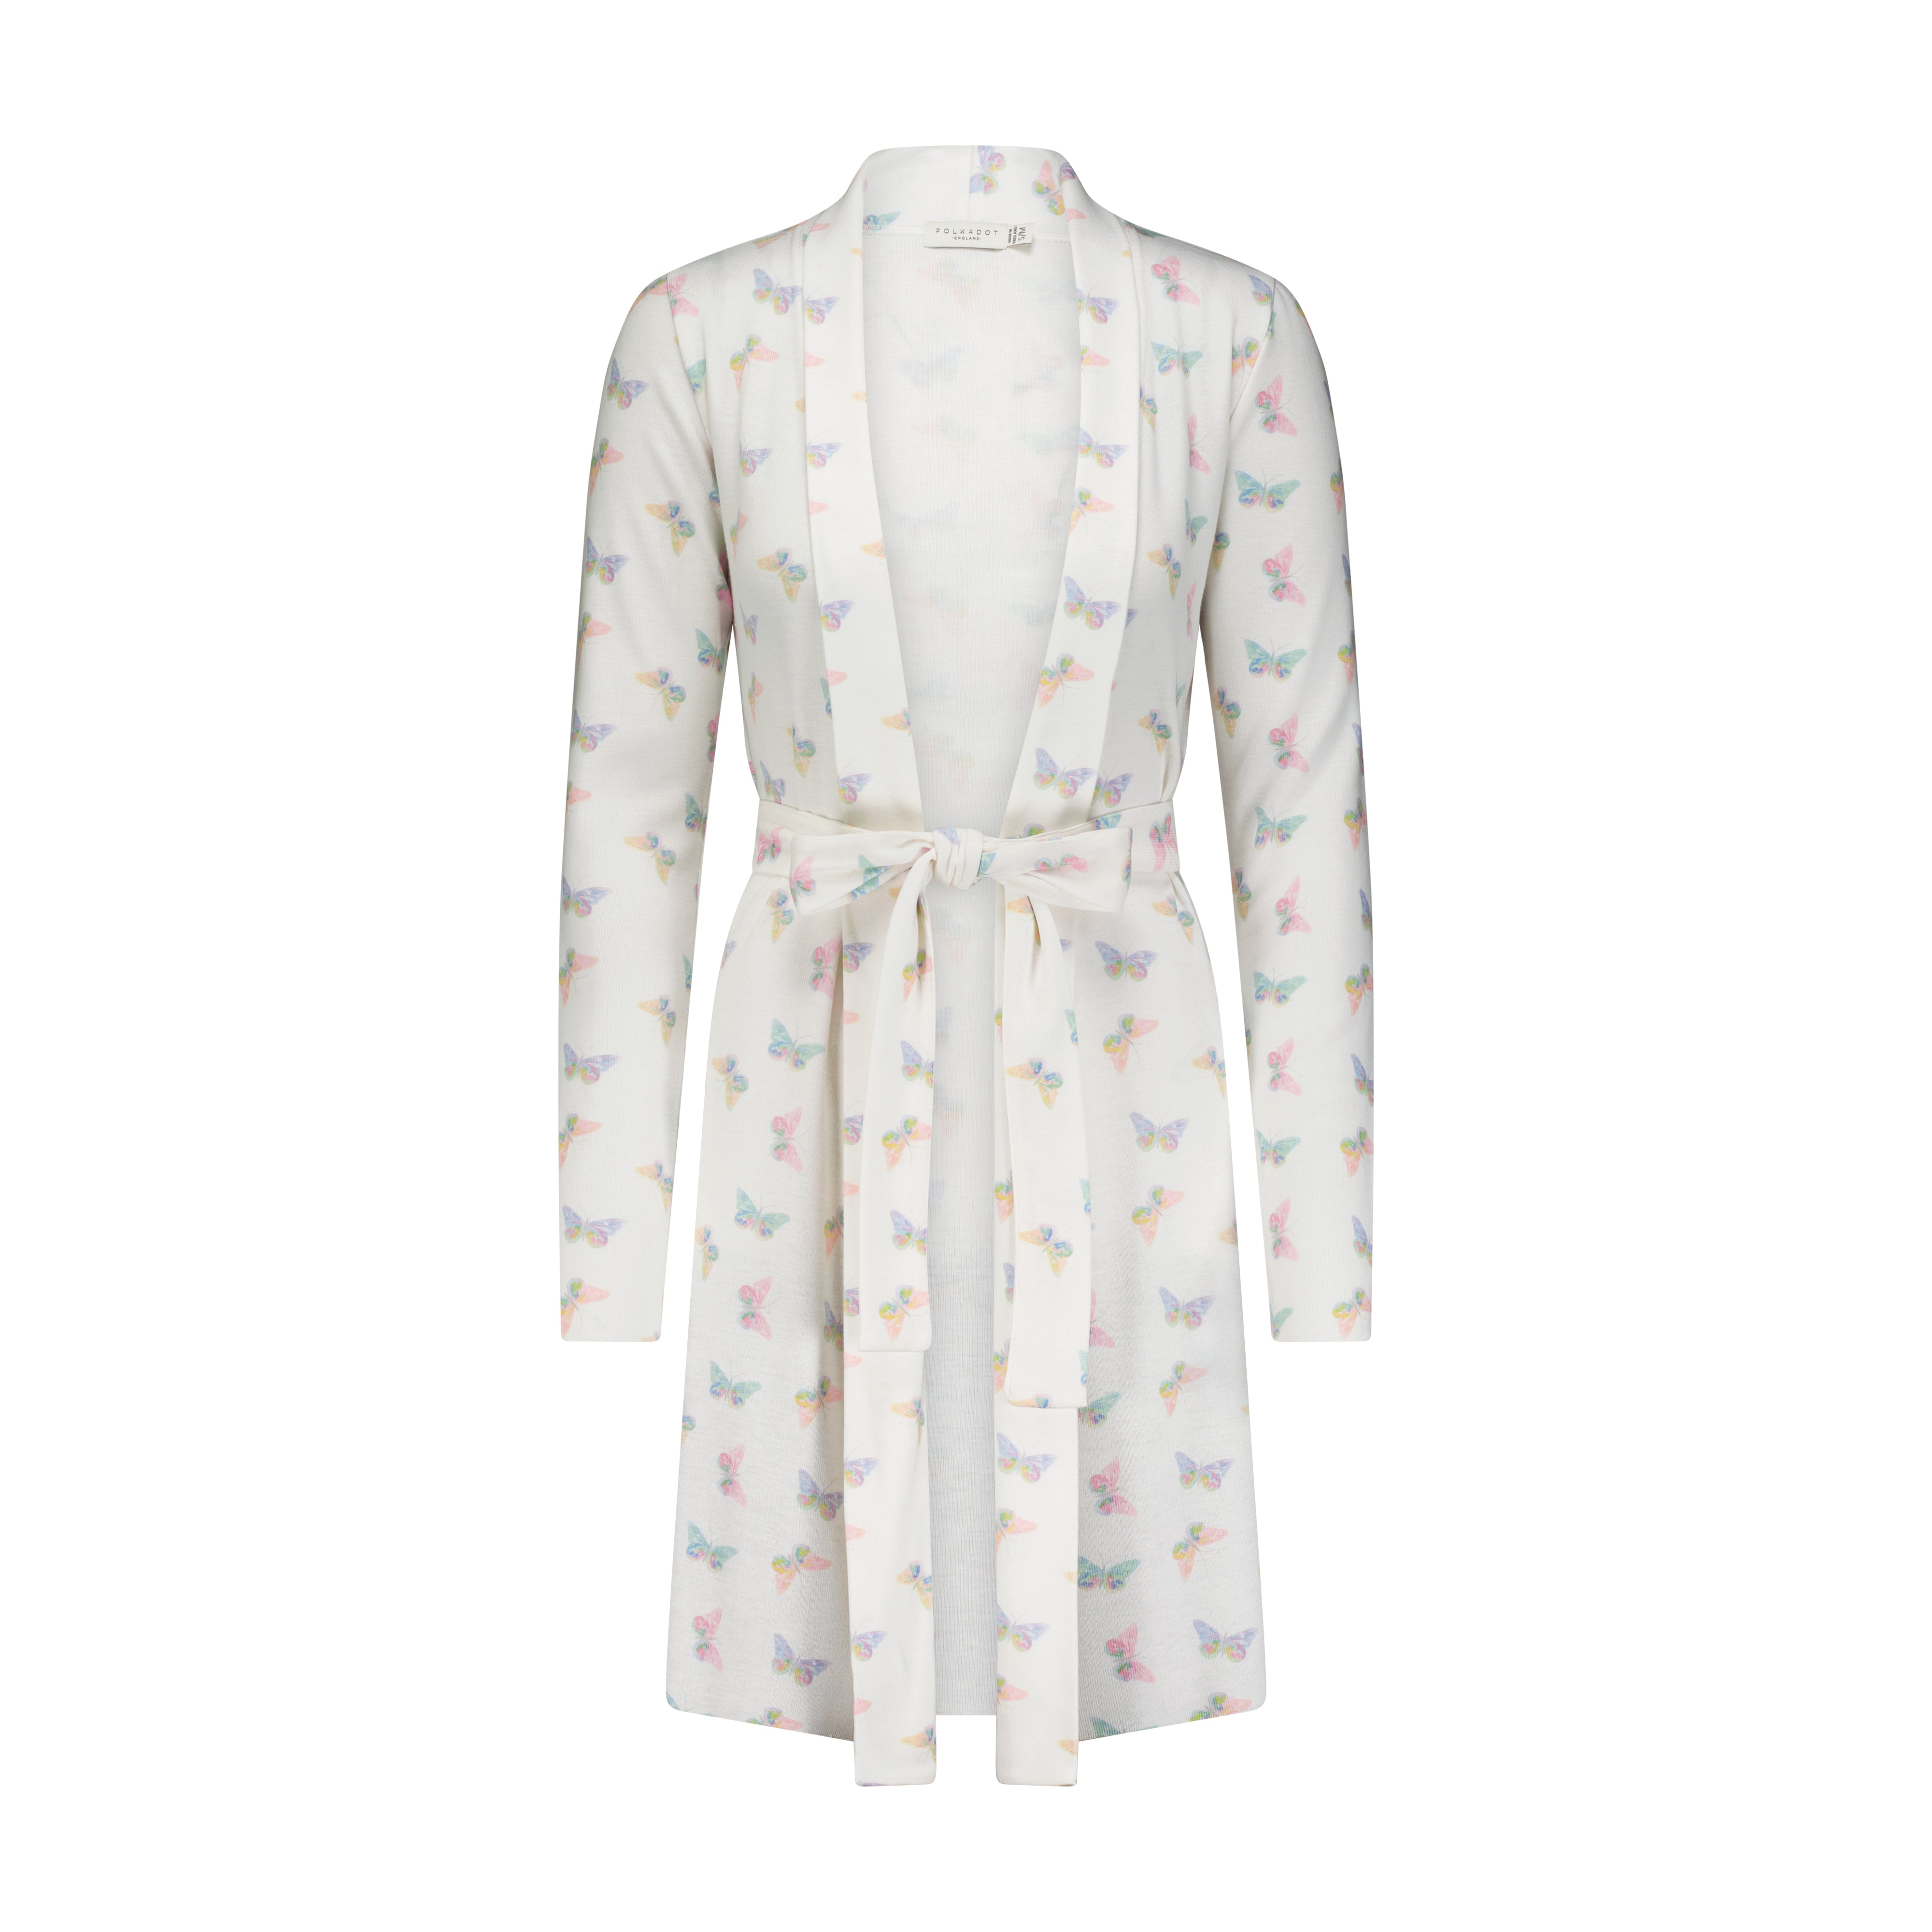 BUTTERFLY Print Cardigan ROBE -NEW!